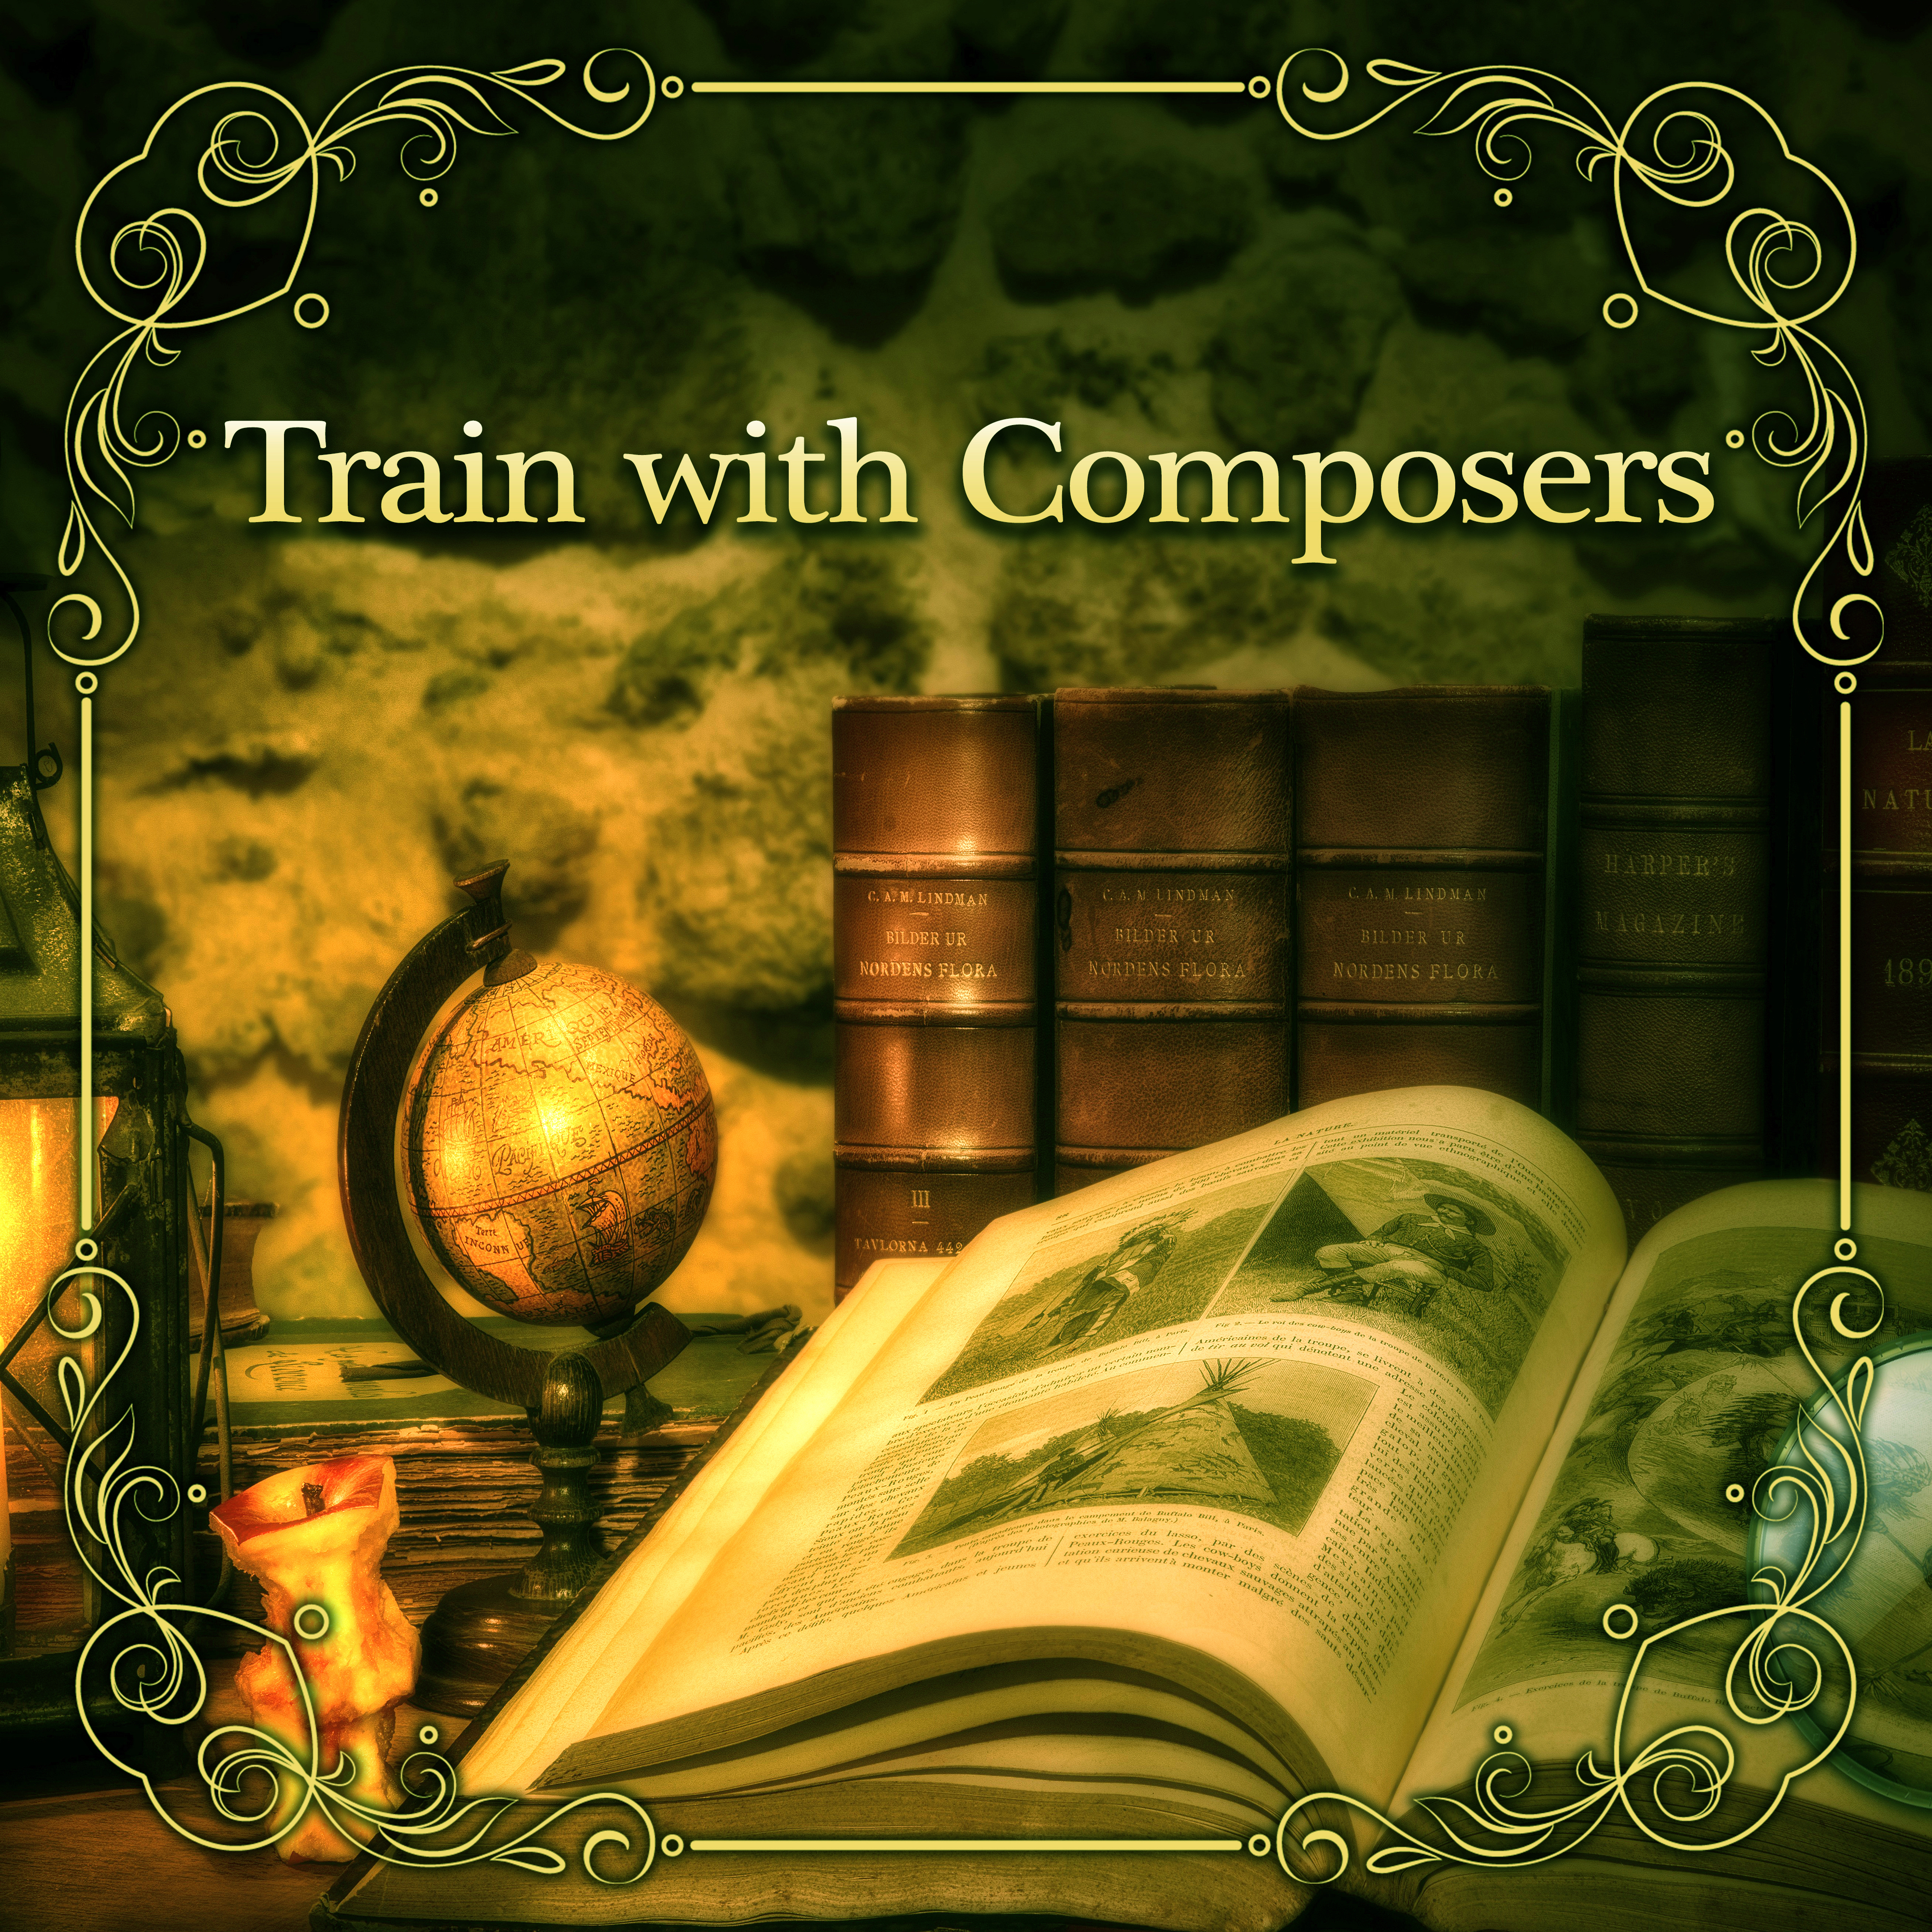 Train with Composers  Music for Study, Music Helps Pass Exam, Easy Learning, Clear Brain